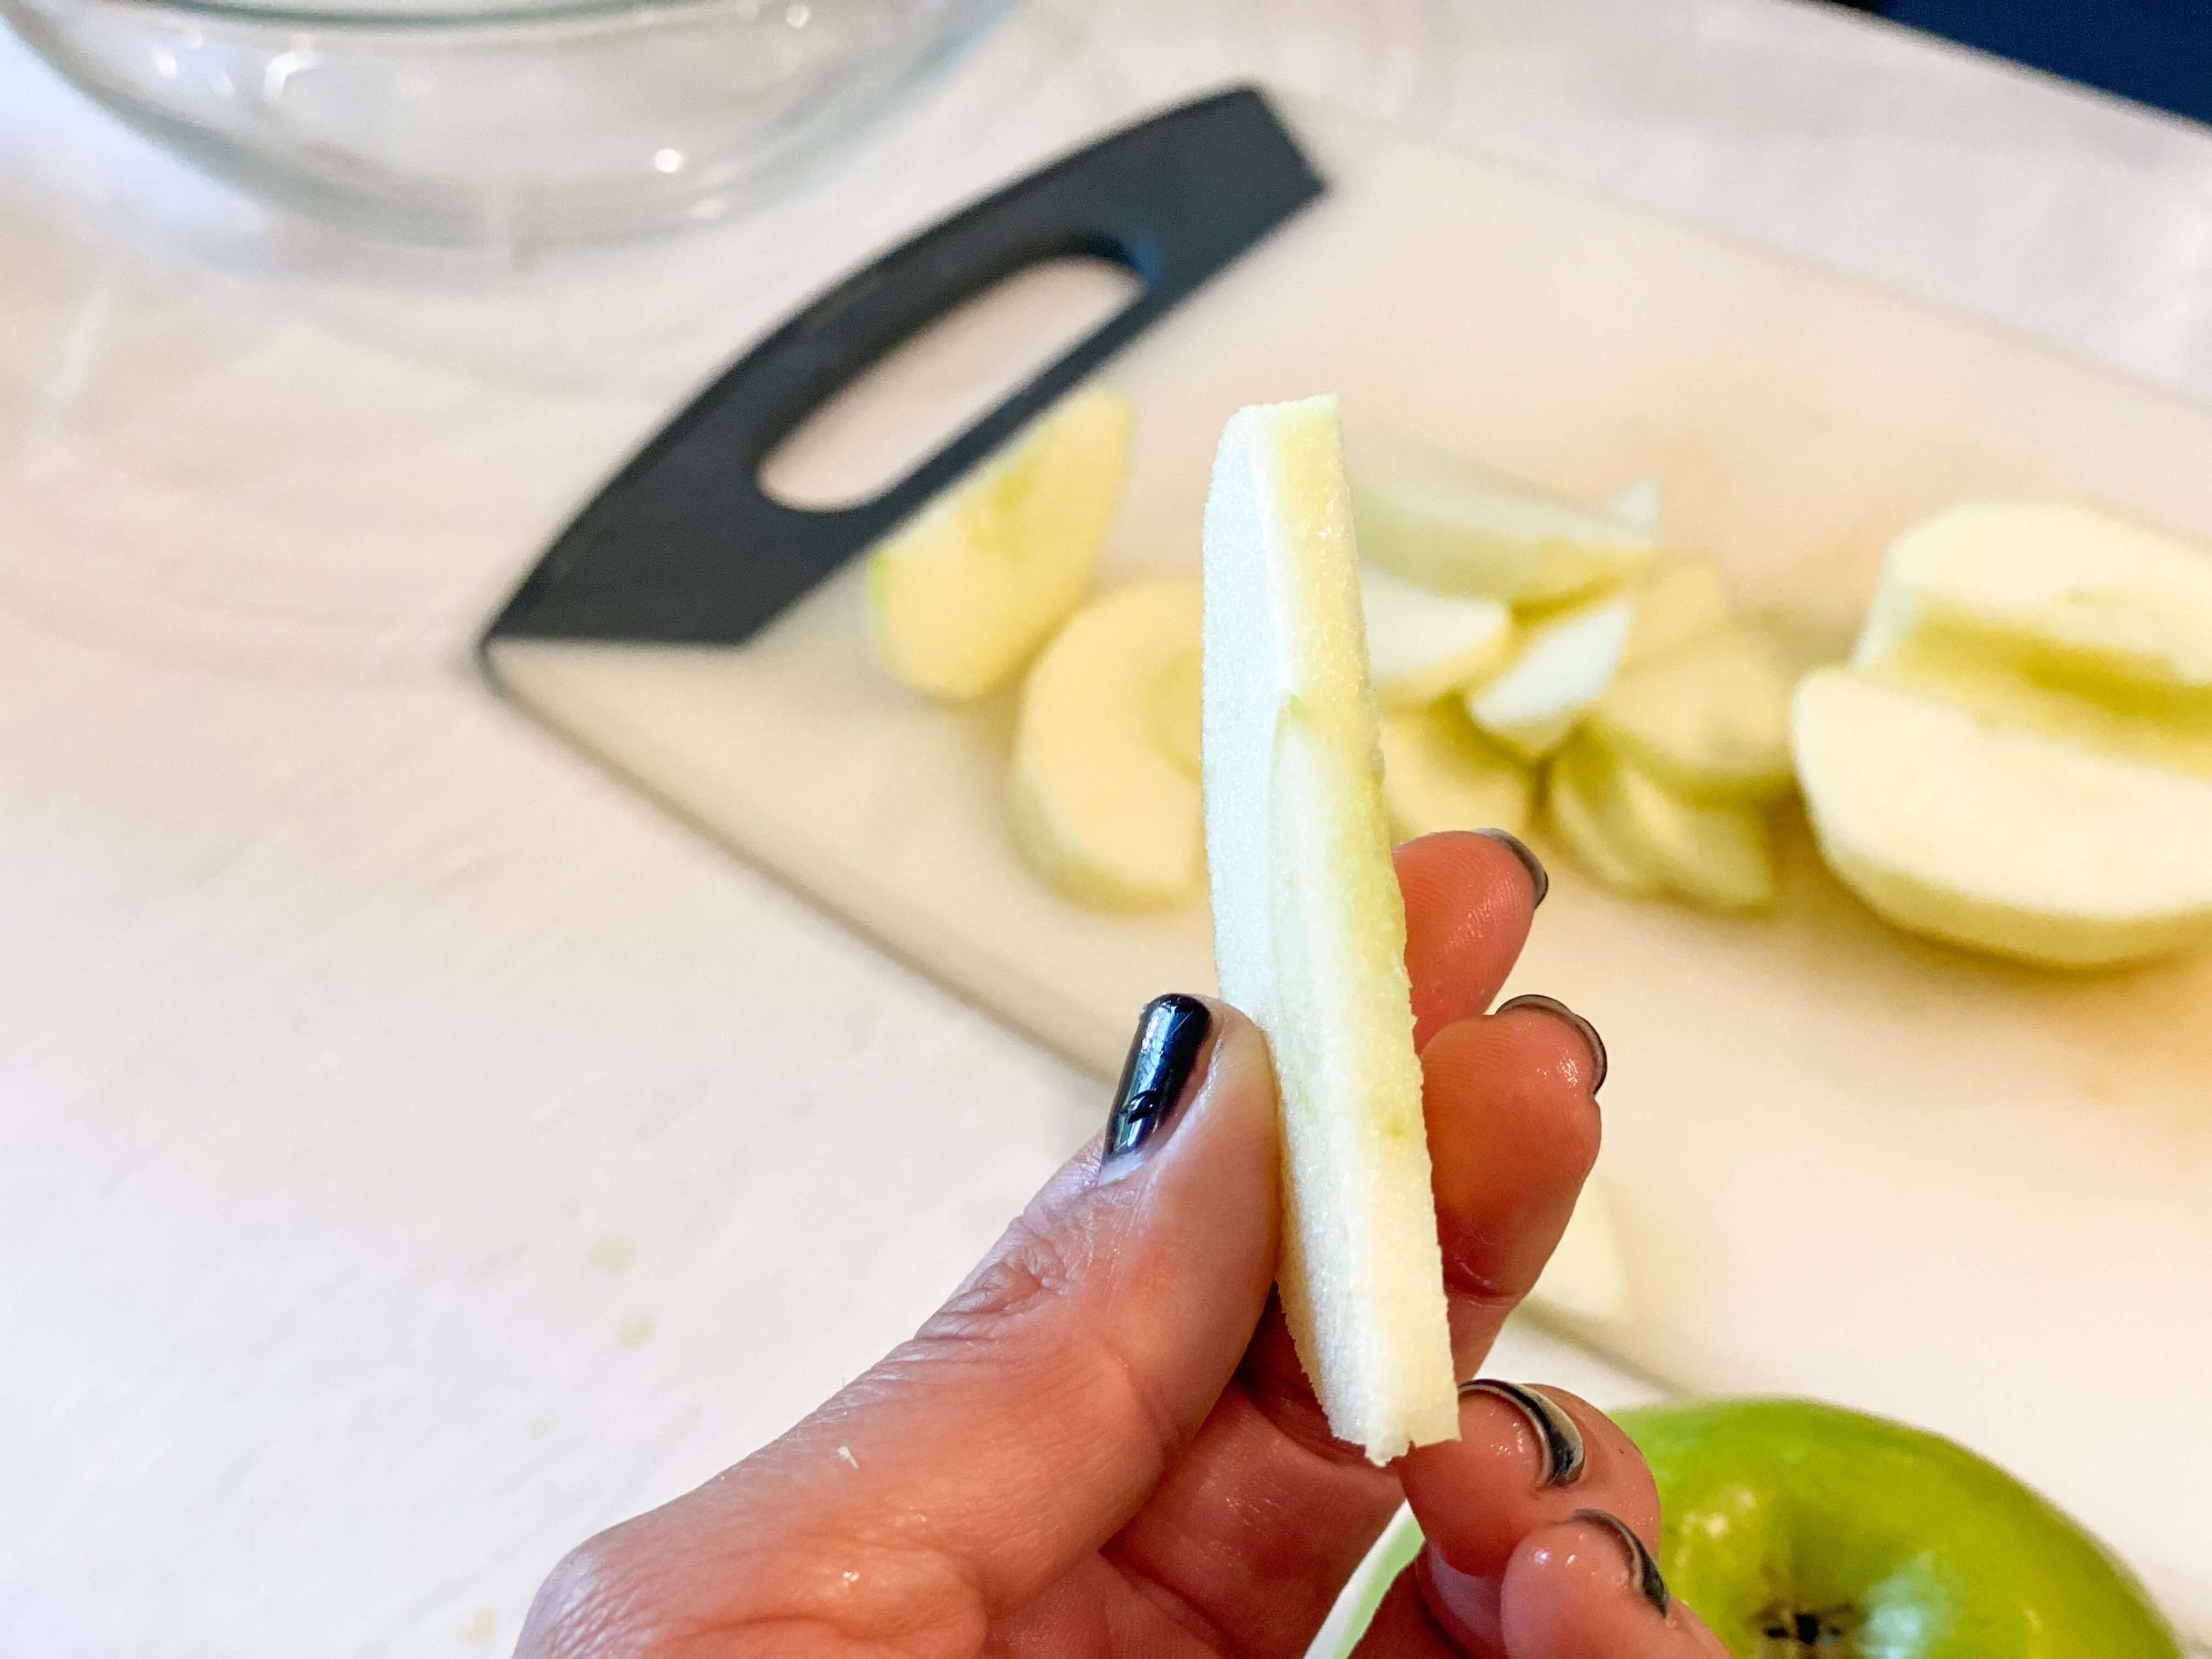 Thinly sliced apple